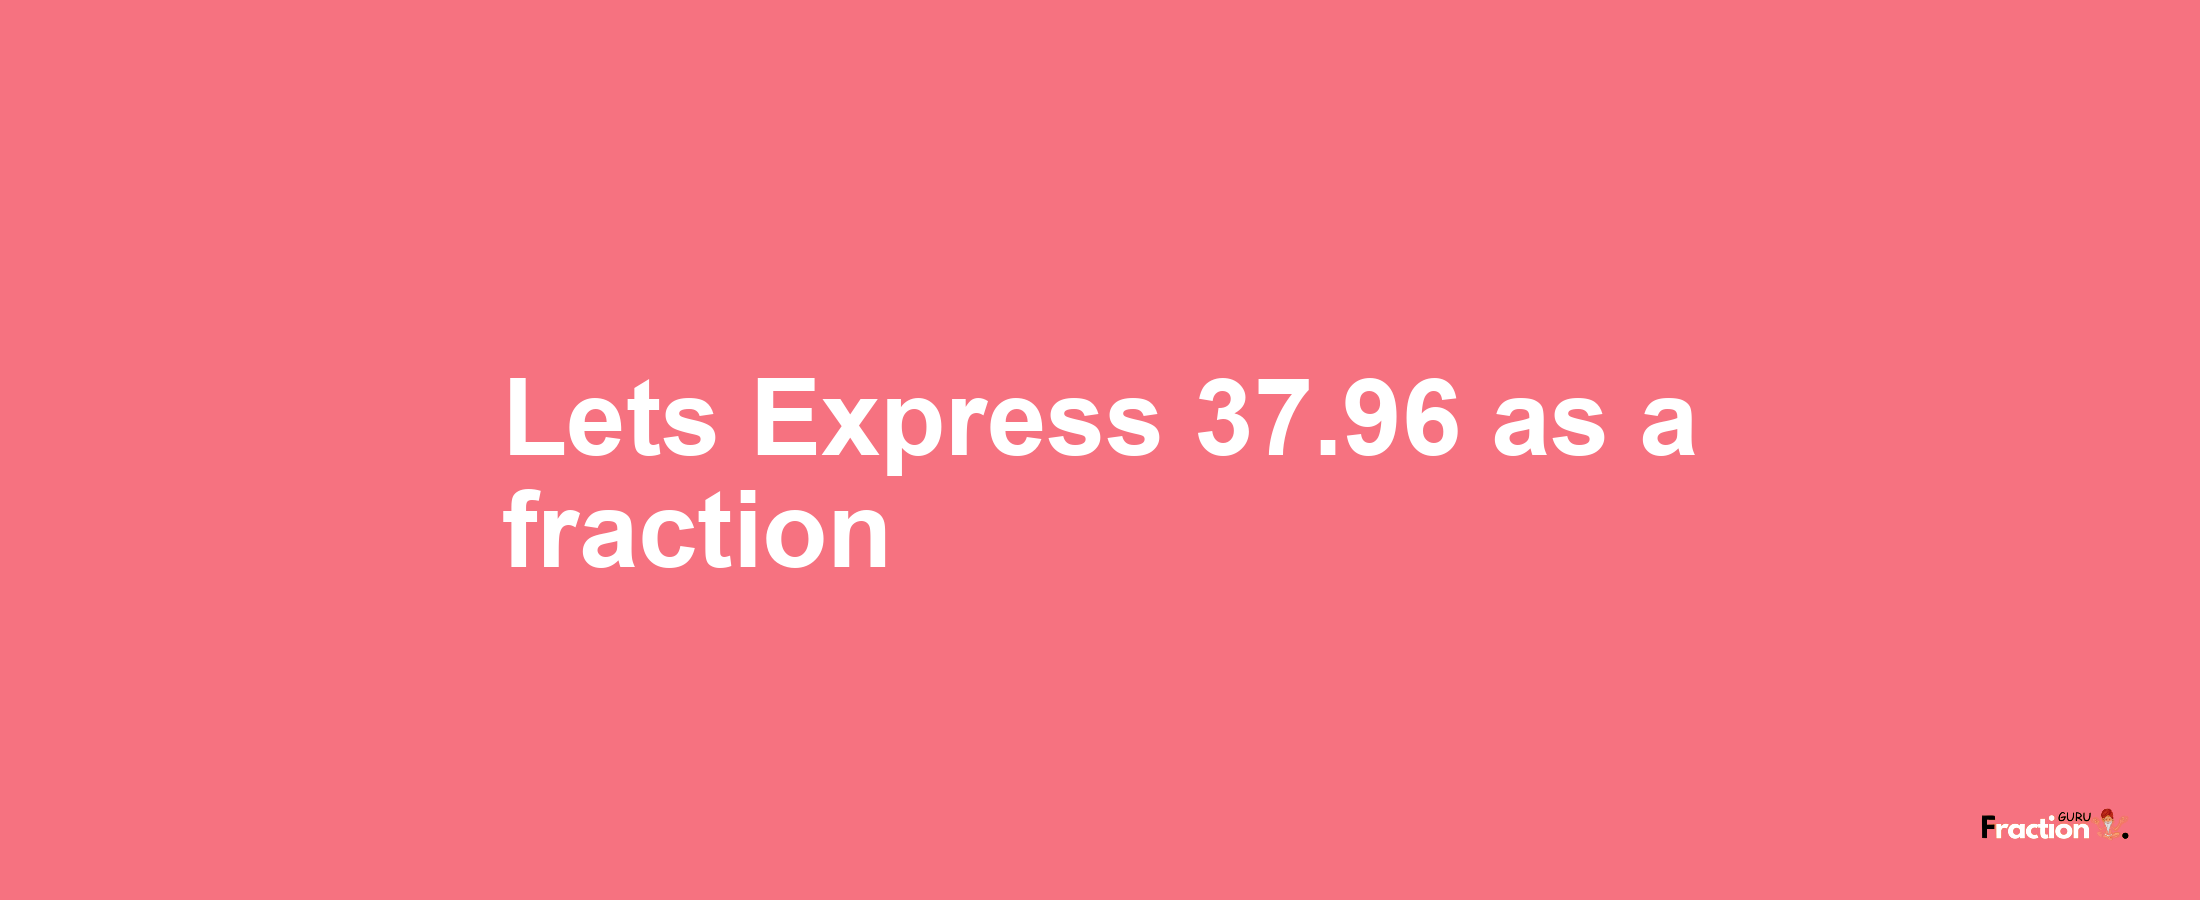 Lets Express 37.96 as afraction